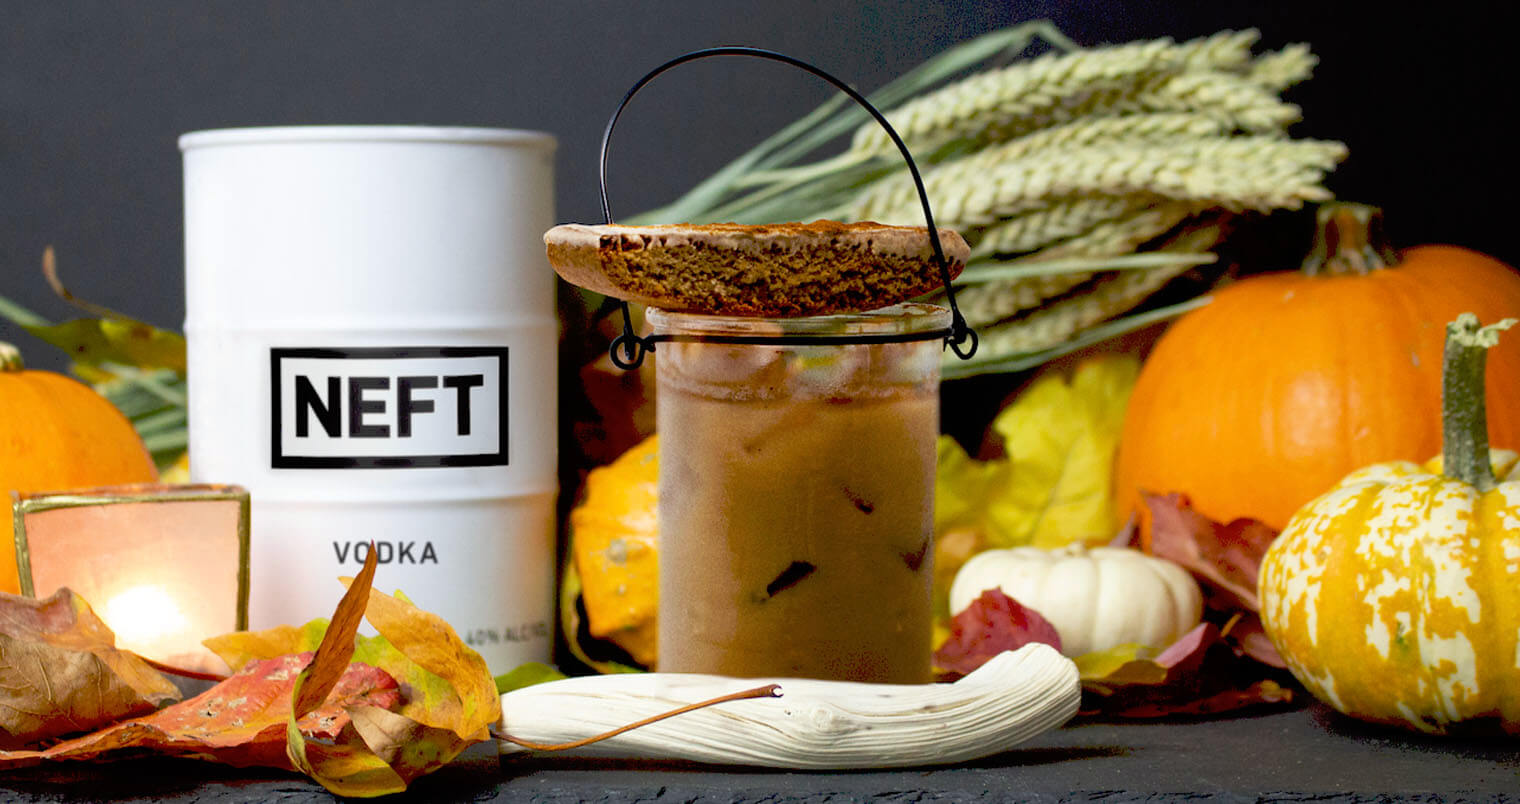 NEFT Cocktails For The Holidays, featured image